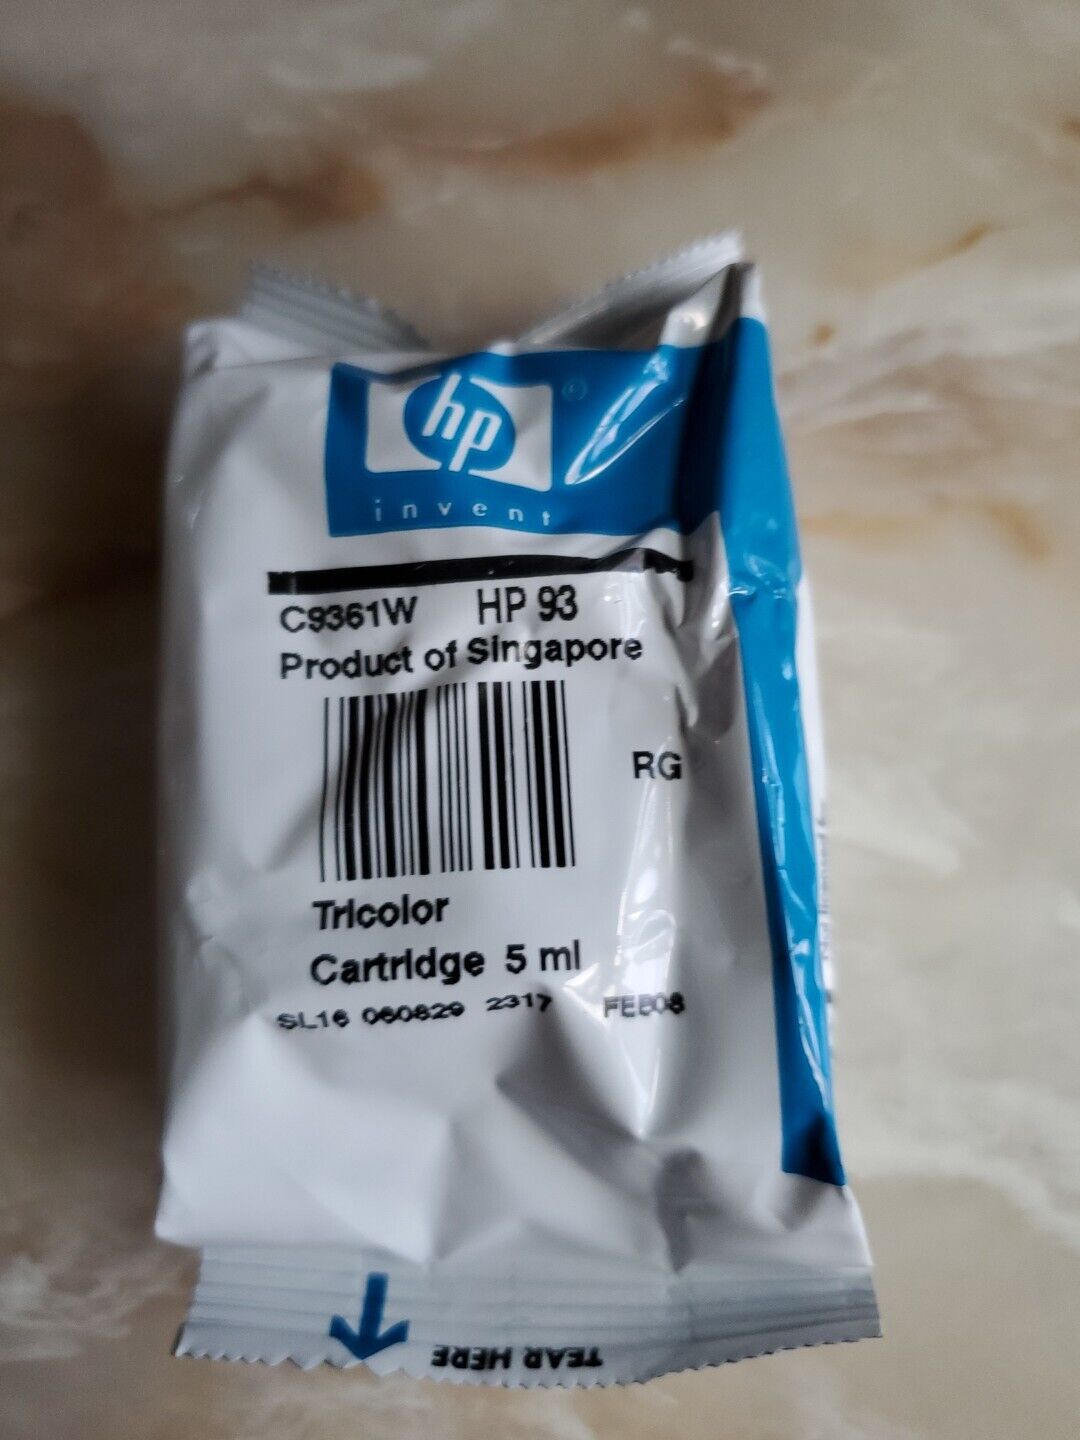 NEW - Genuine HP 93 Tri-color Ink Cartridge C9361W. Out Of Box But Sealed.